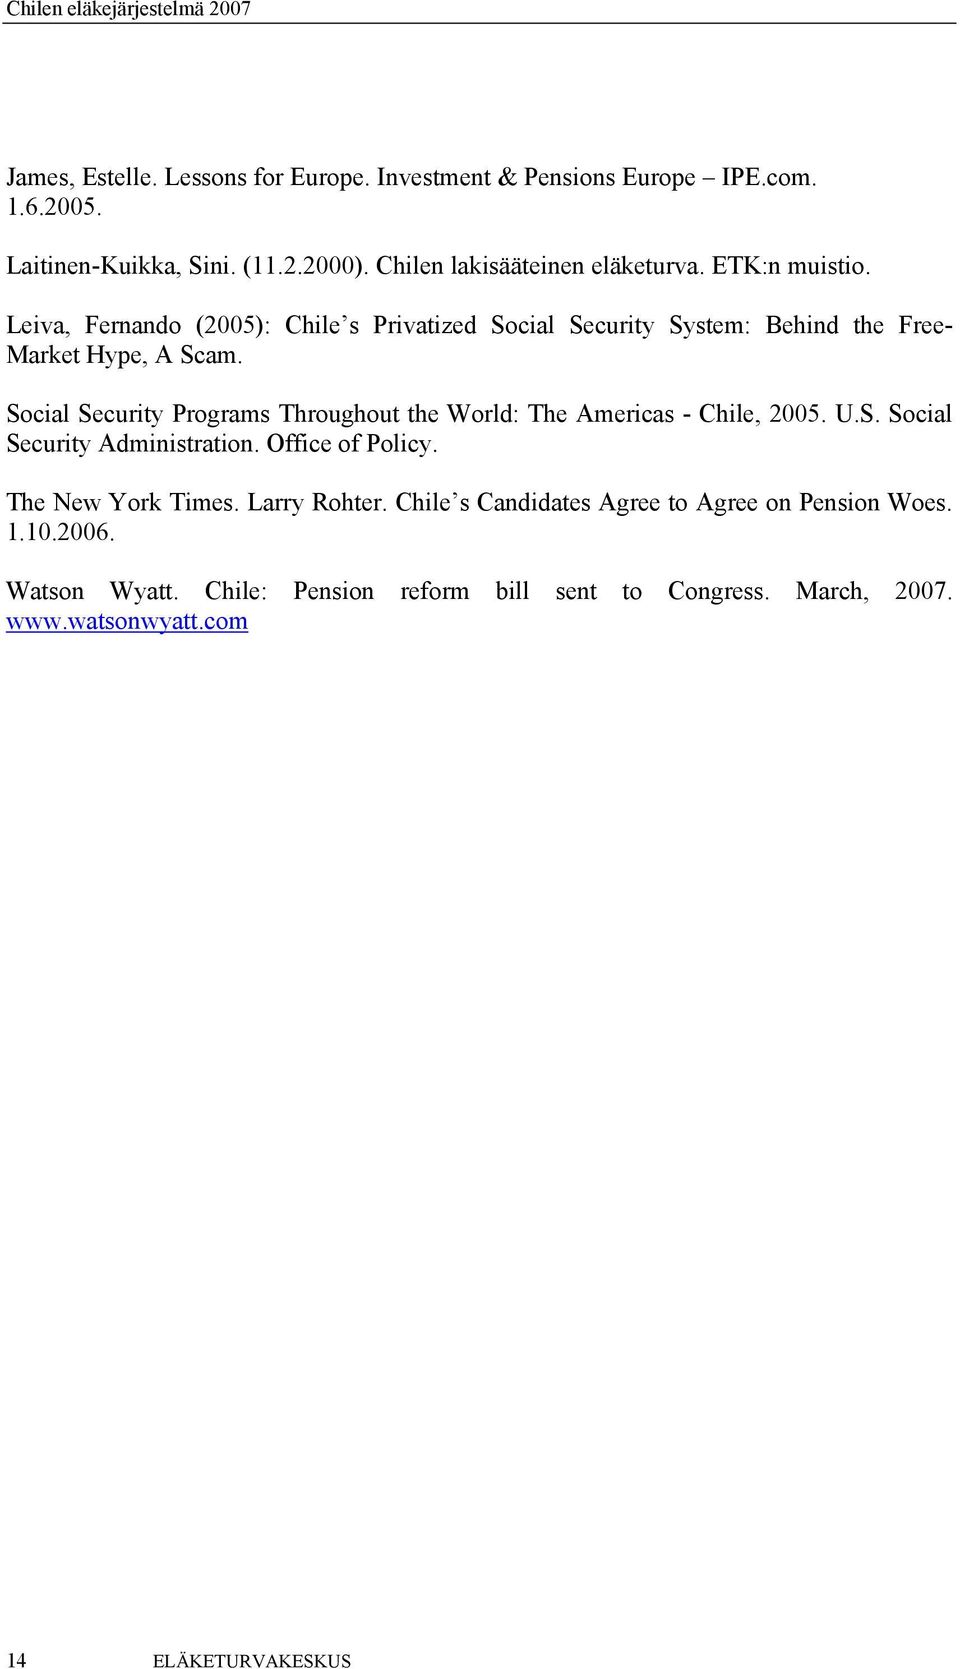 Social Security Programs Throughout the World: The Americas - Chile, 2005. U.S. Social Security Administration. Office of Policy. The New York Times.